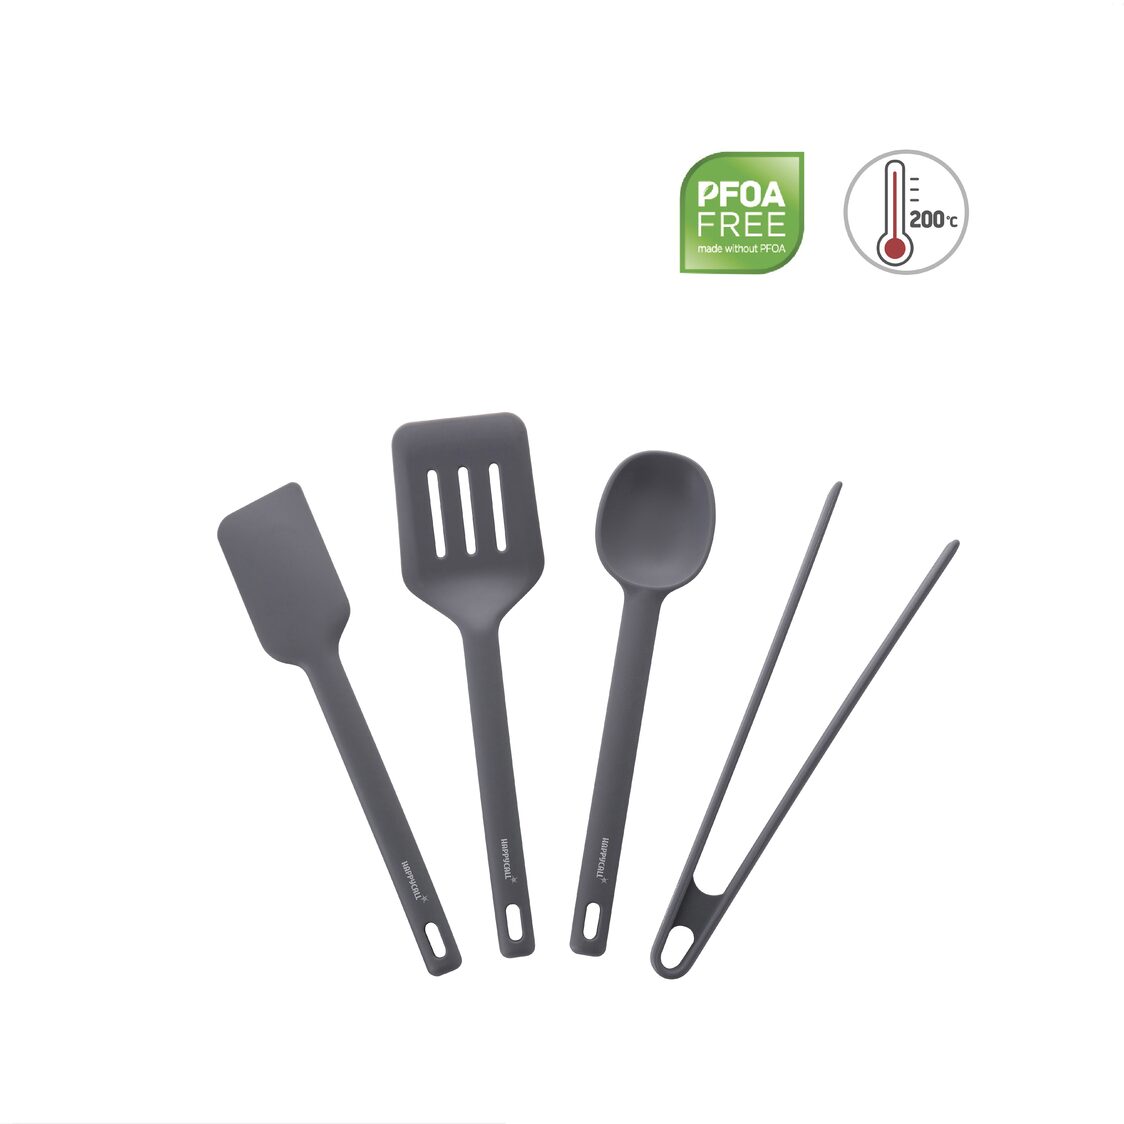 https://media.metro.sg/ProductImages/0f773ffd-3be4-4c0f-b2a7-51a36ef3b35d/2/std/happycall-viva-silicone-4-pc-cooking-tools-set-4900-0075-230418095502.jpg